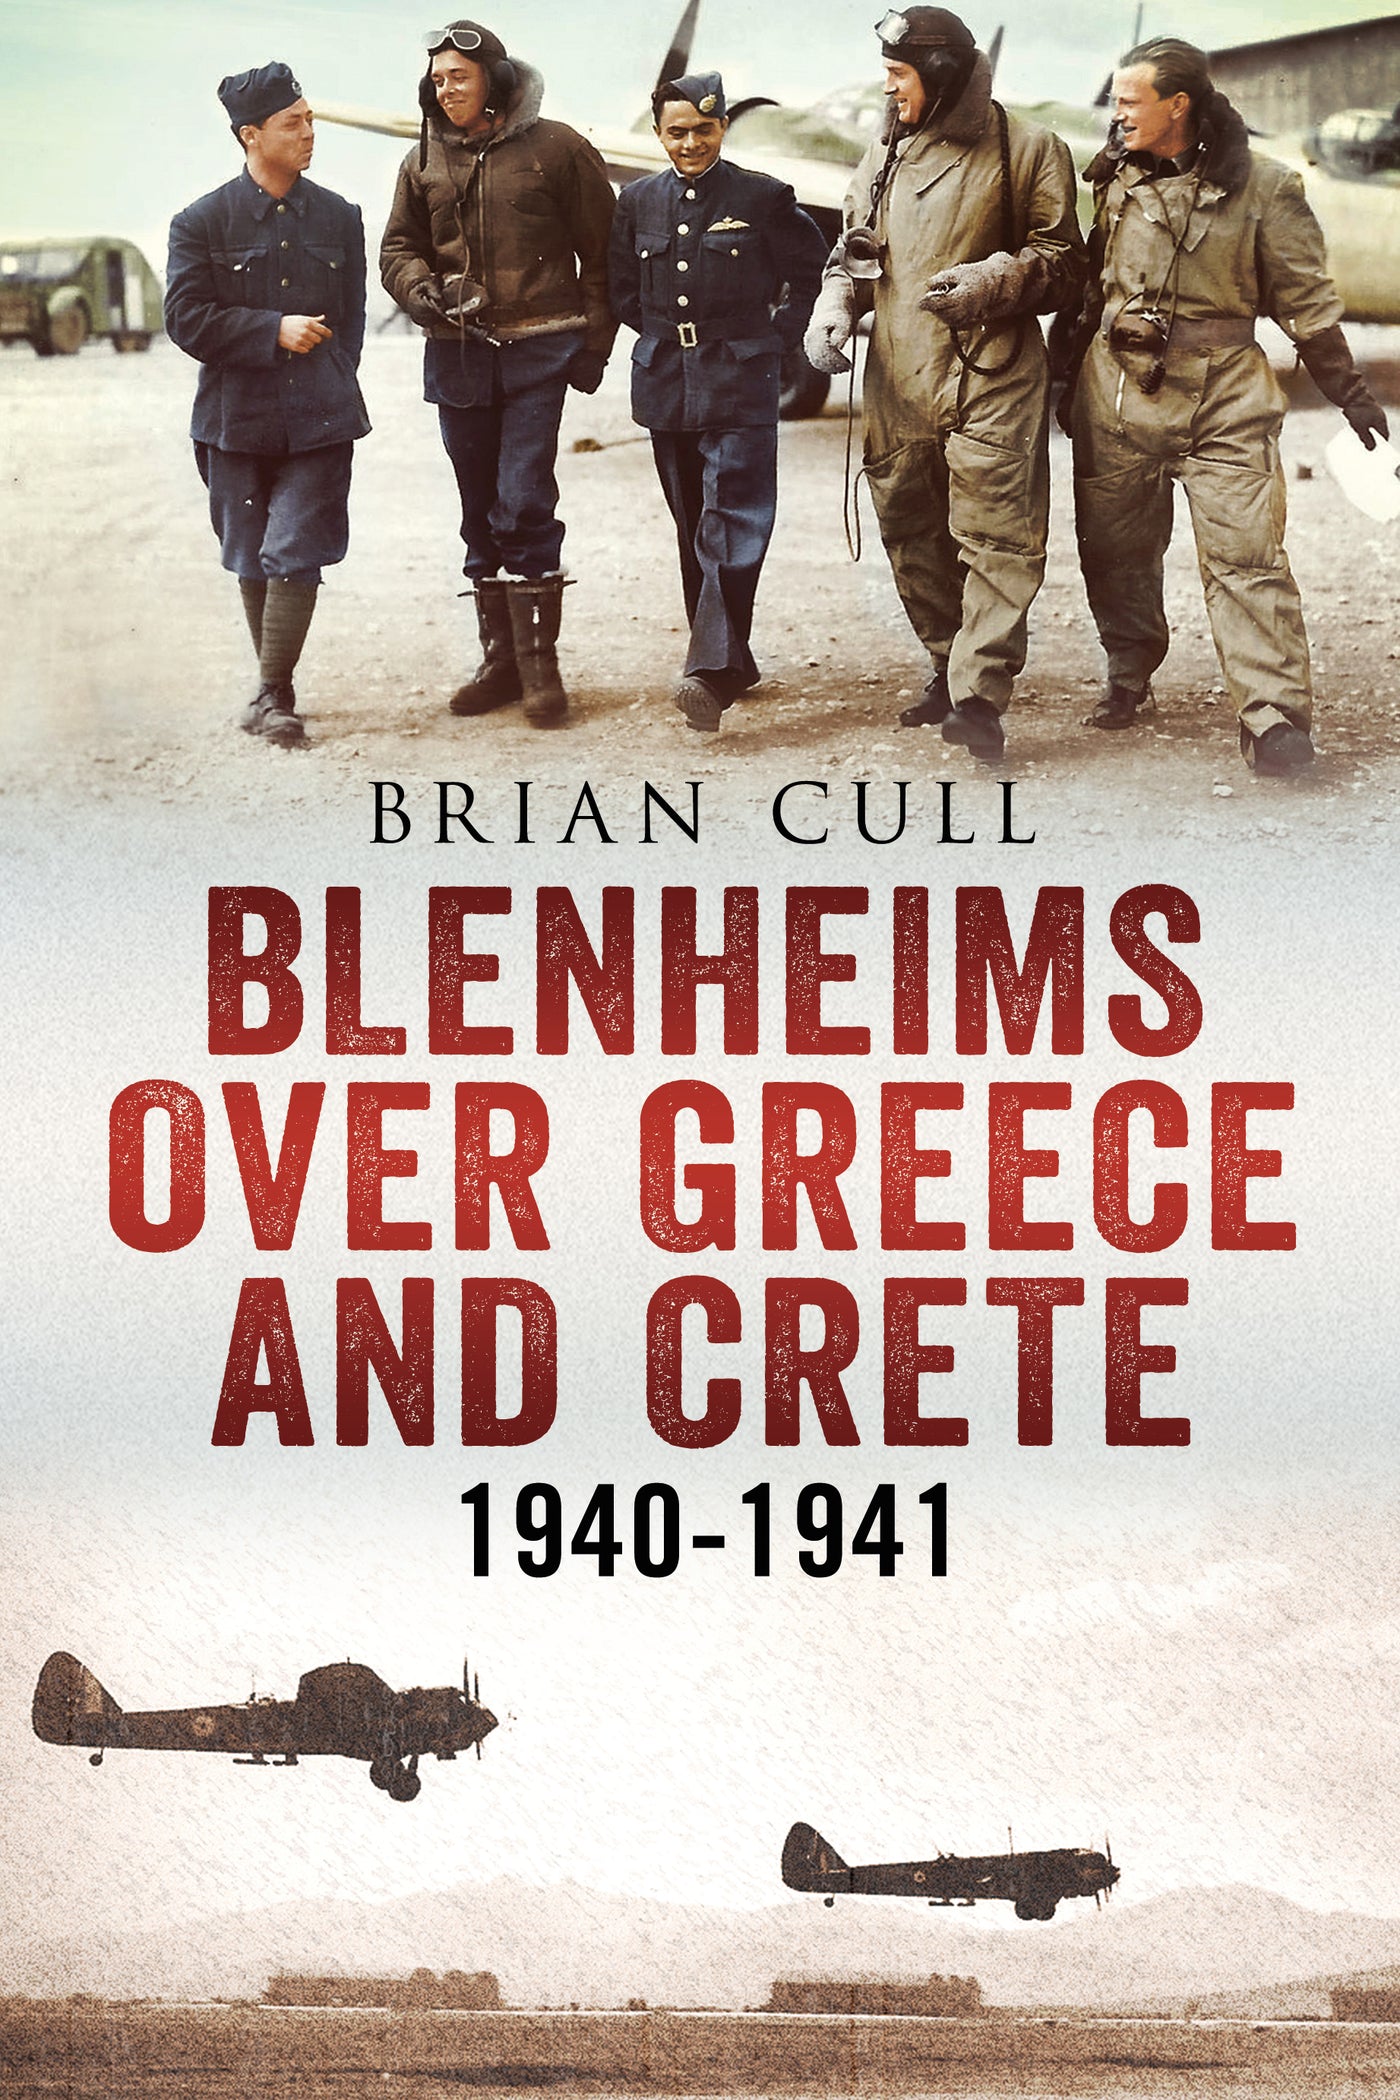 Blenheims over Greece and Crete